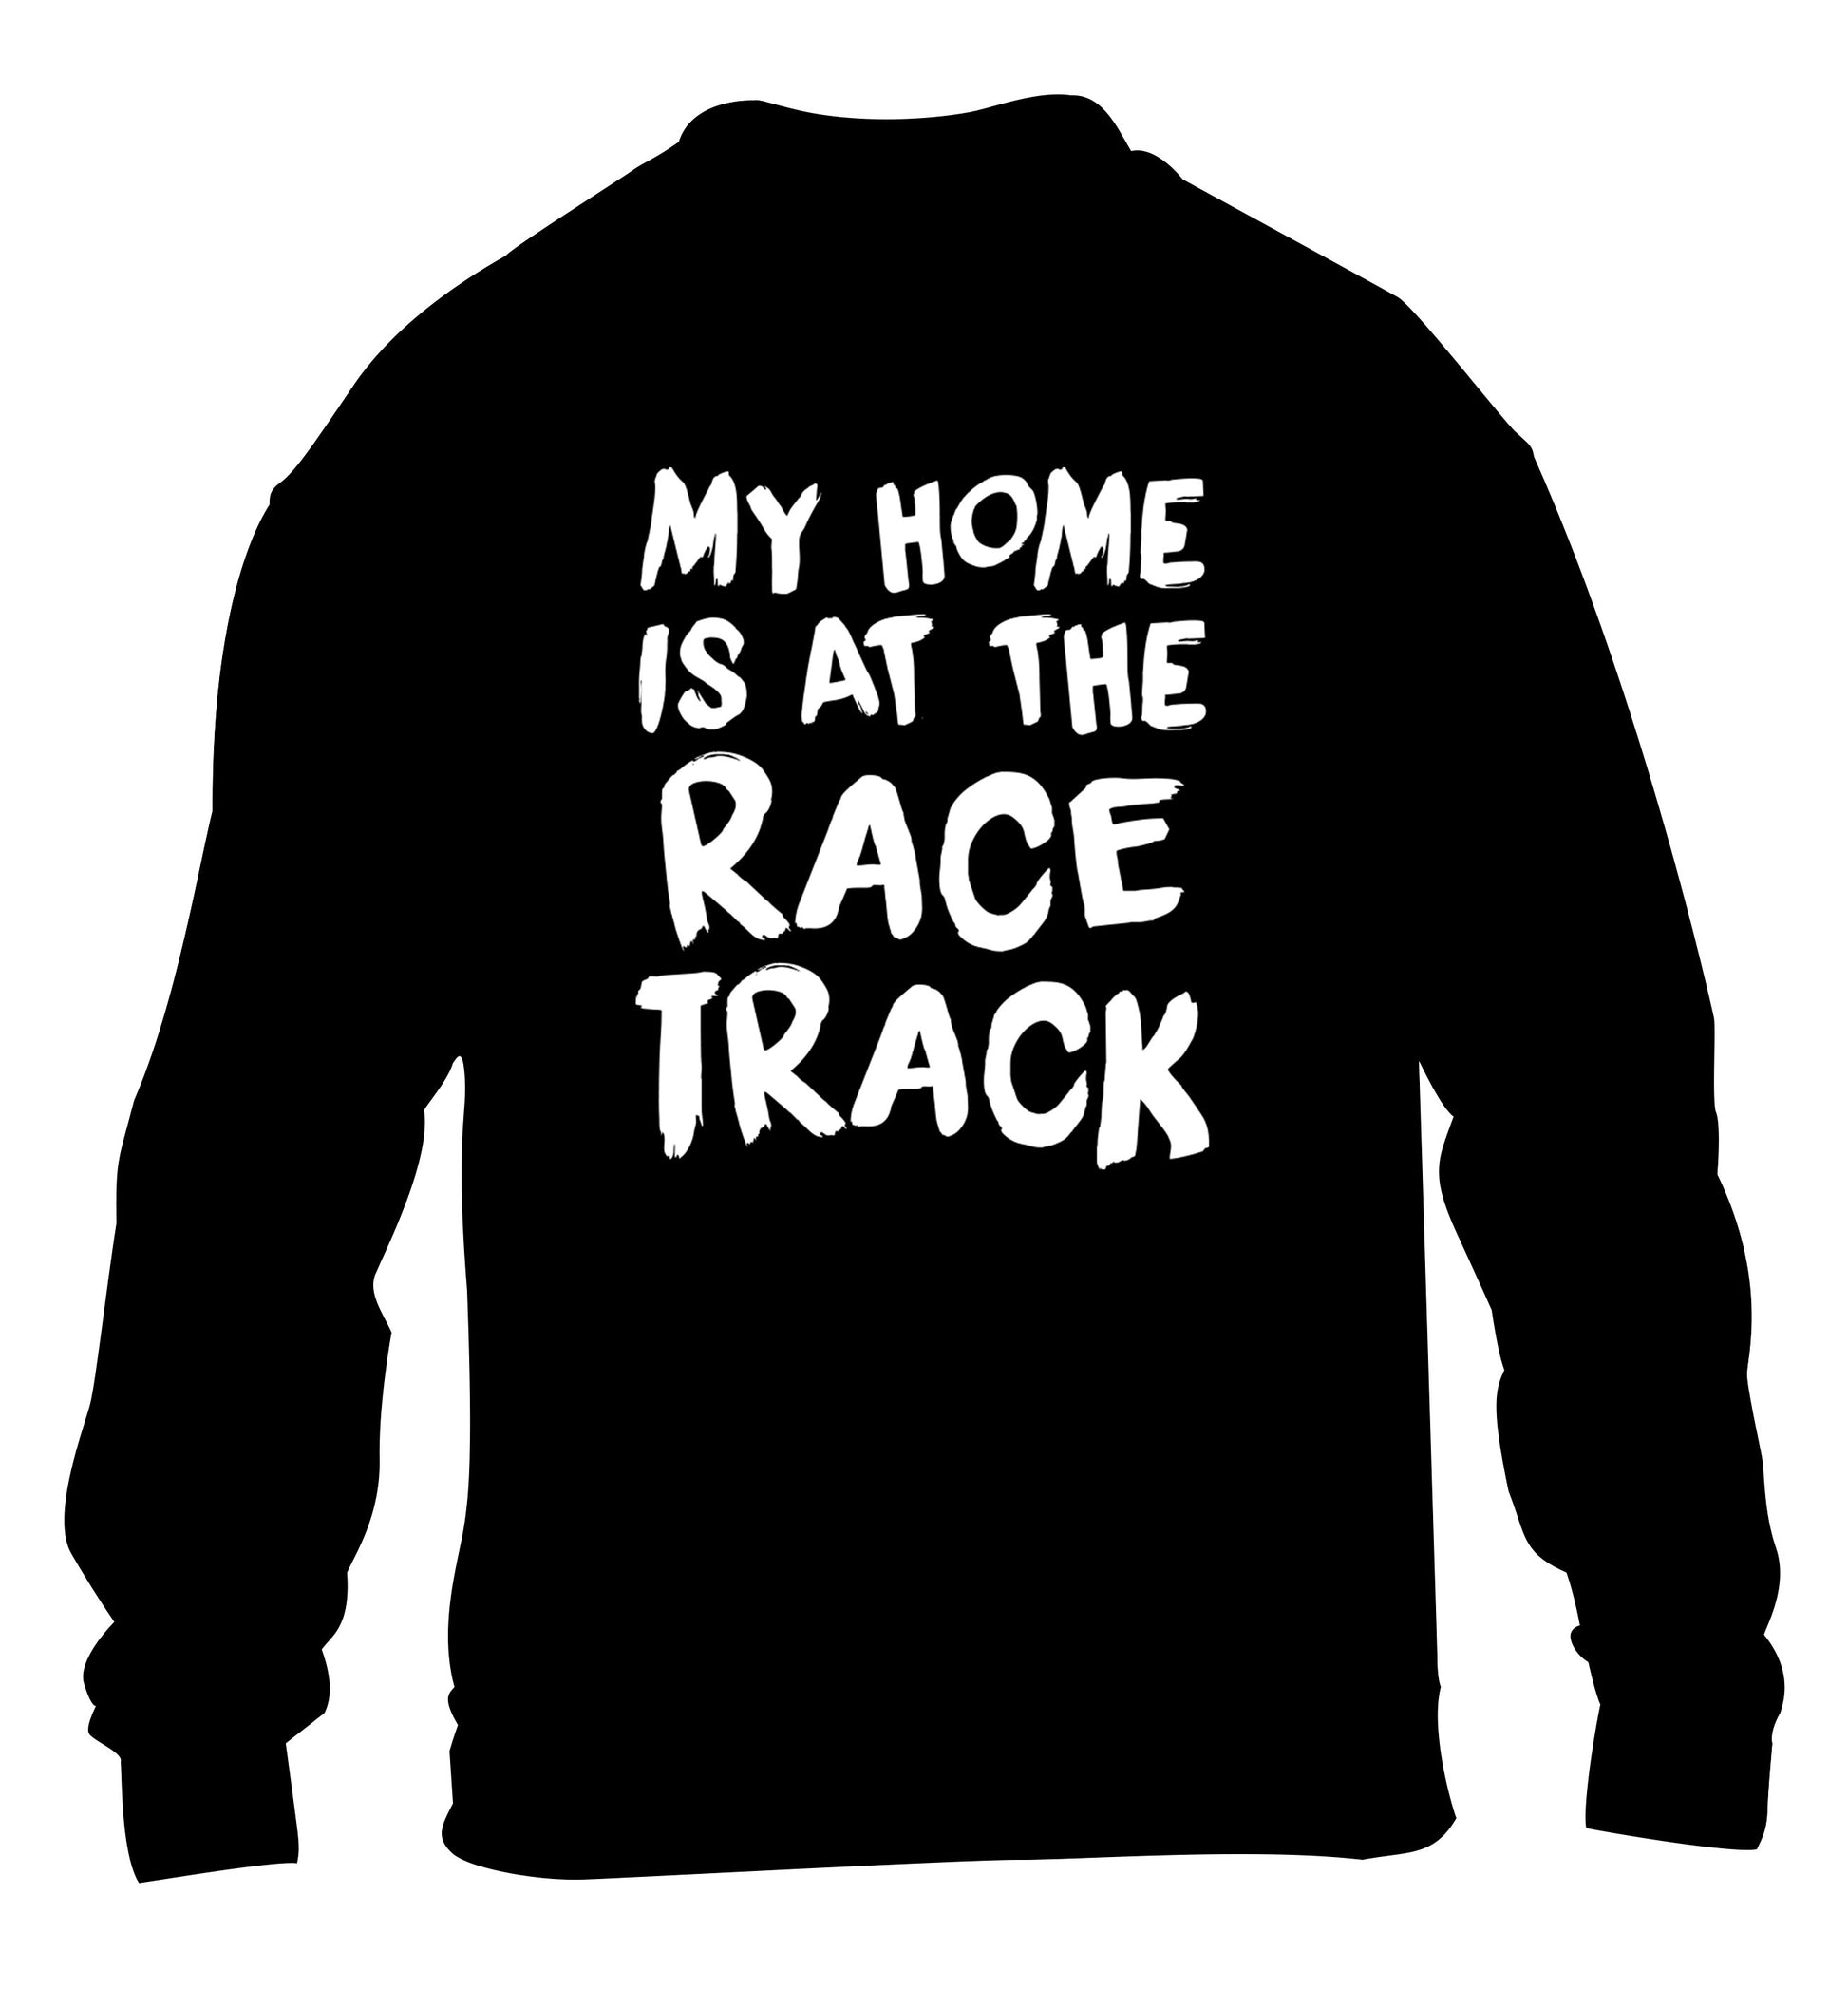 My home is at the race track children's black sweater 12-14 Years